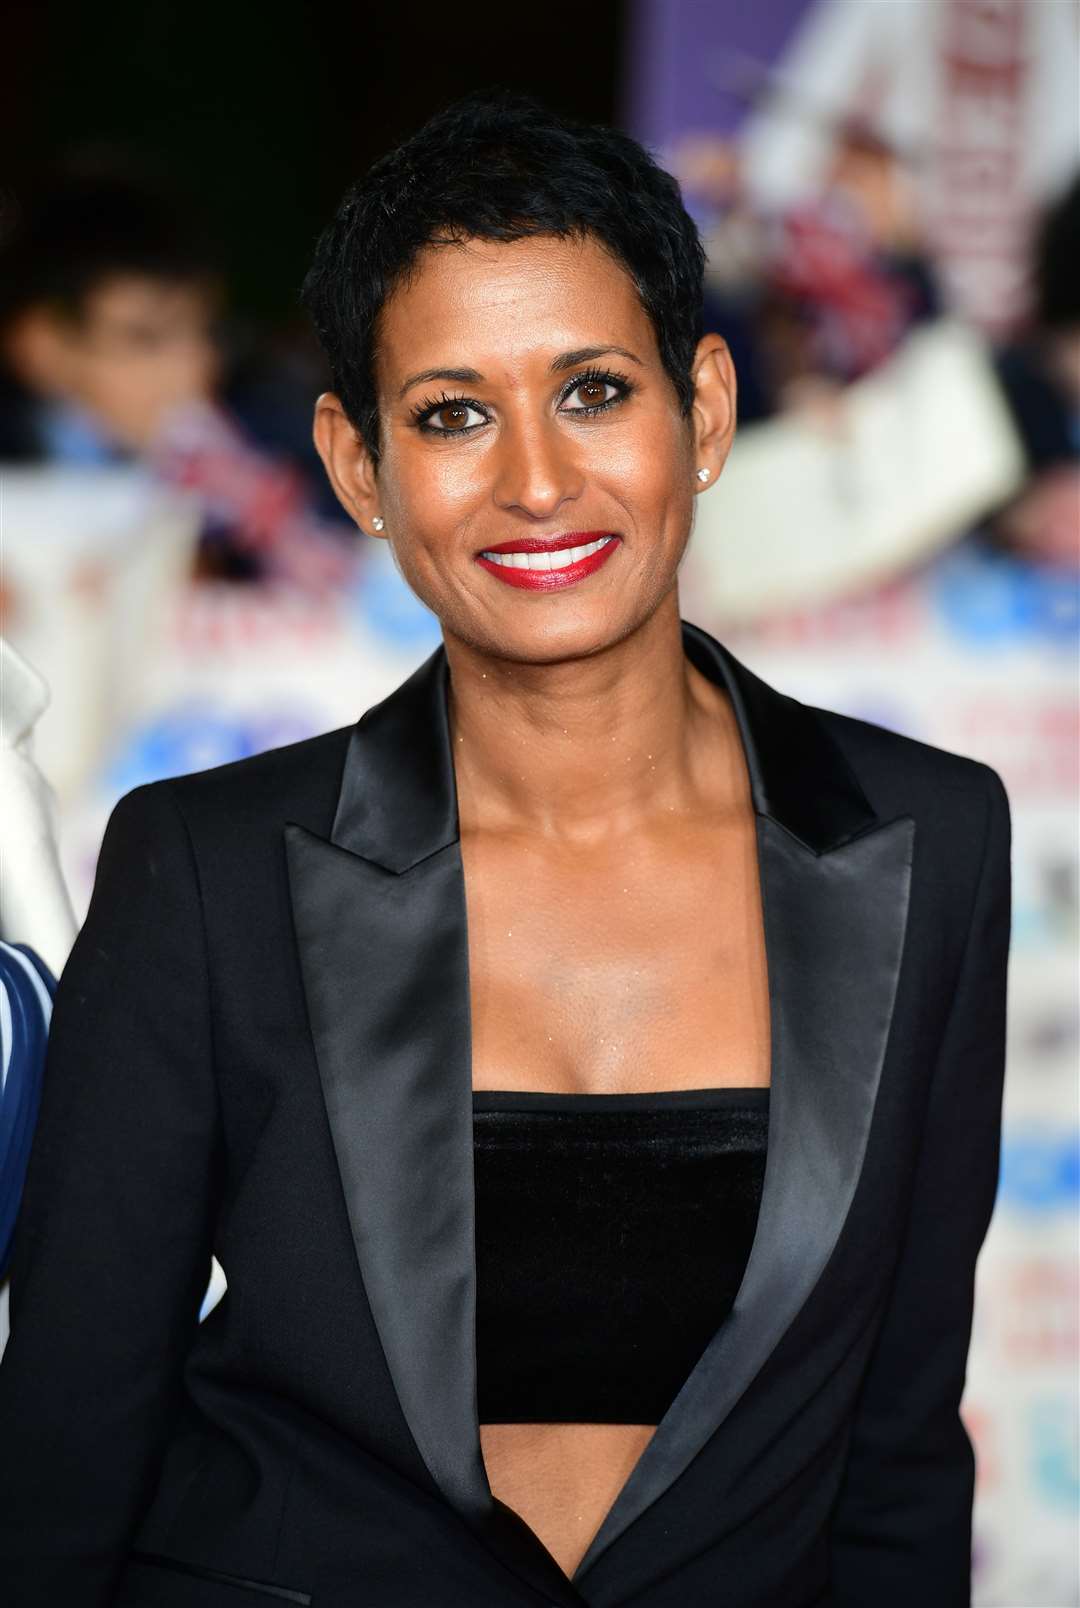 Naga Munchetty is among the BBC stars who have been criticised for moonlighting (Ian West/PA)